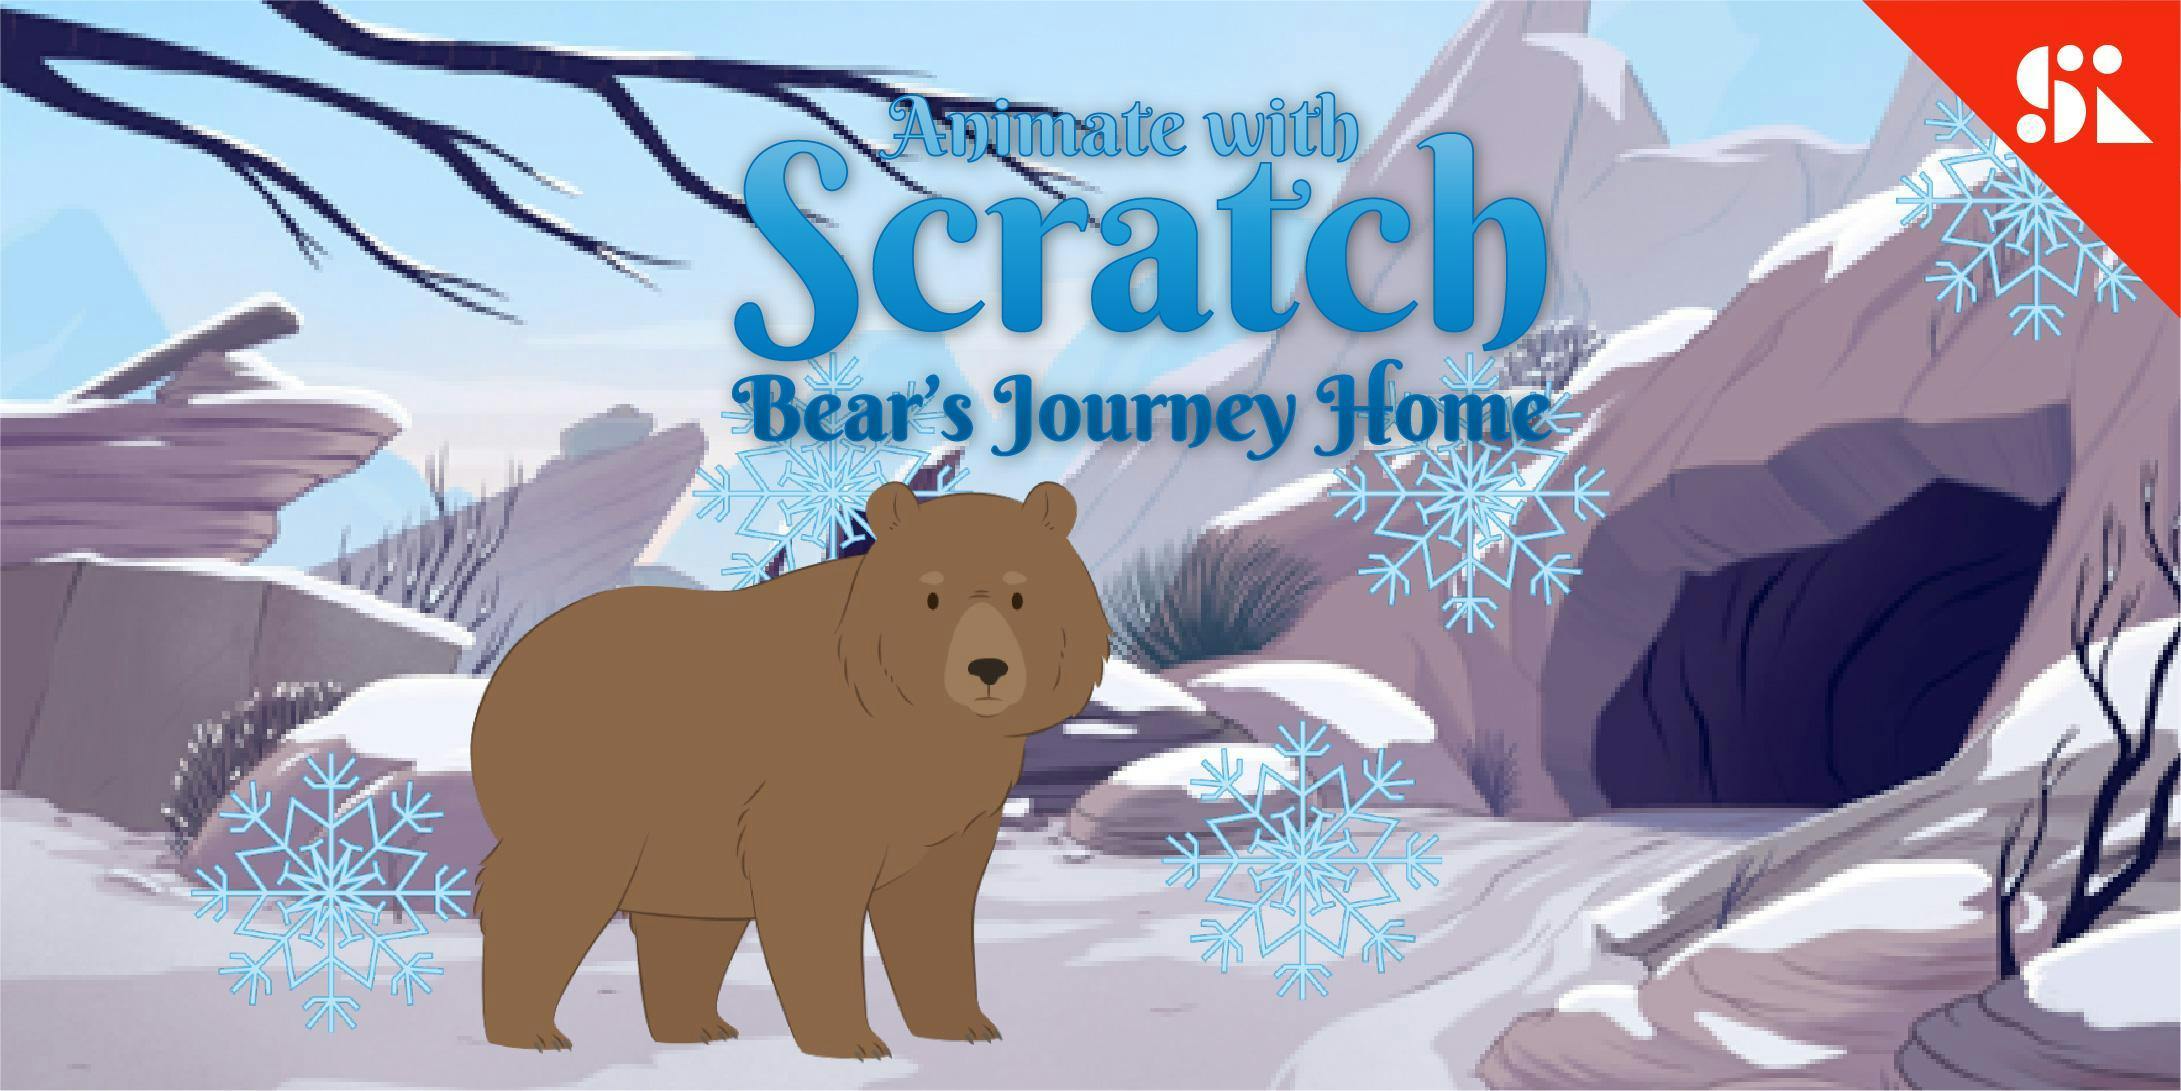 Animate with Scratch: Journey Home with Bear, [Ages 7-10], 15 Dec (Sun 9:30AM) @ Thomson